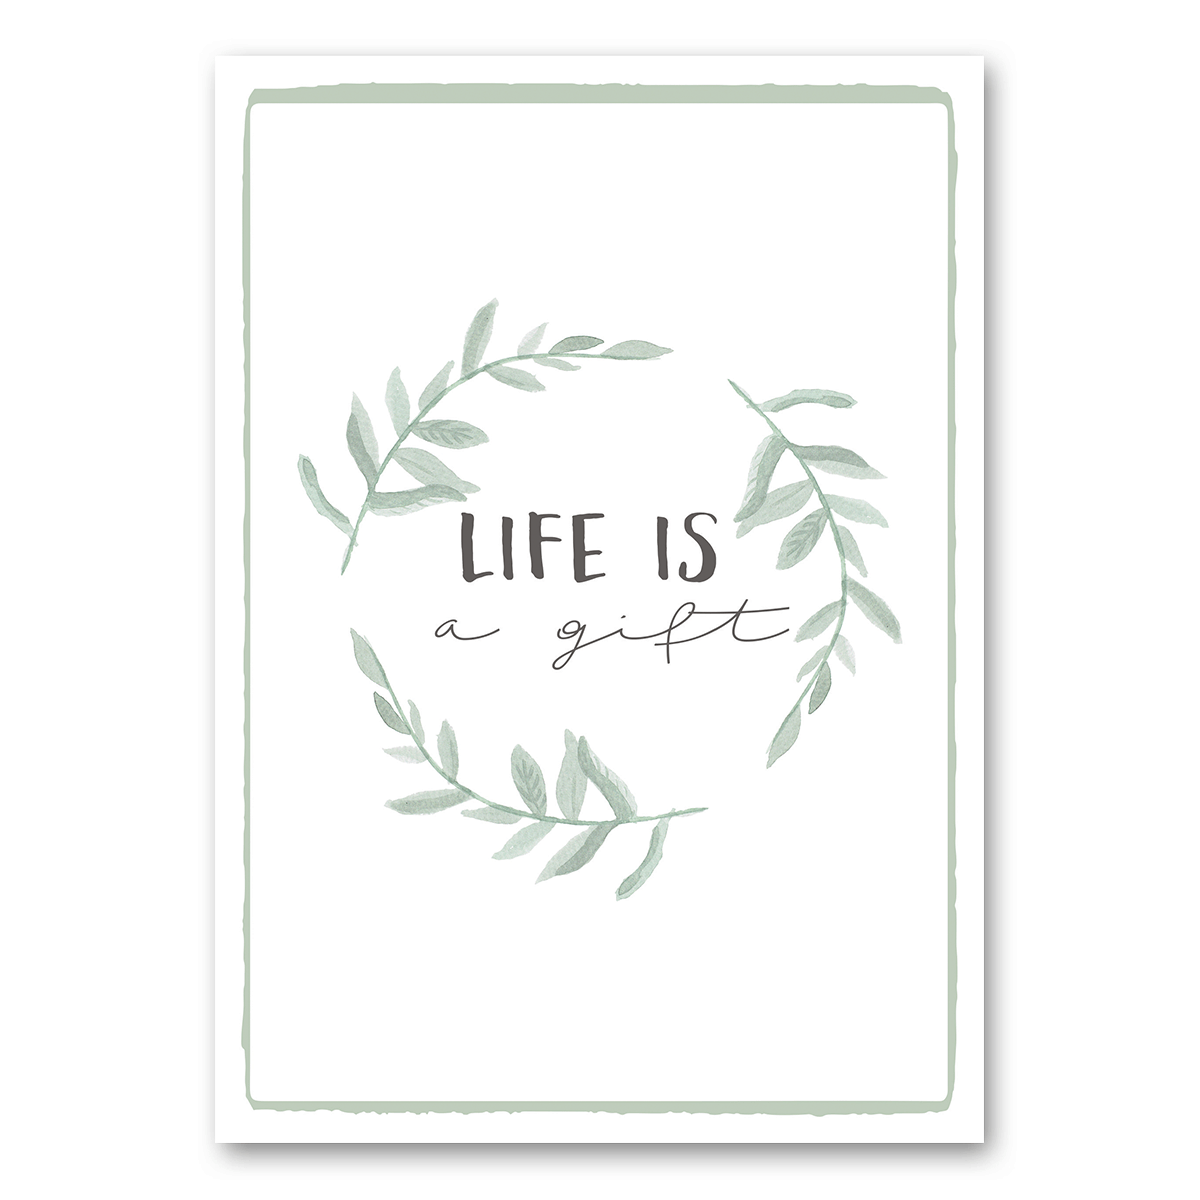 A5 | Life is a gift